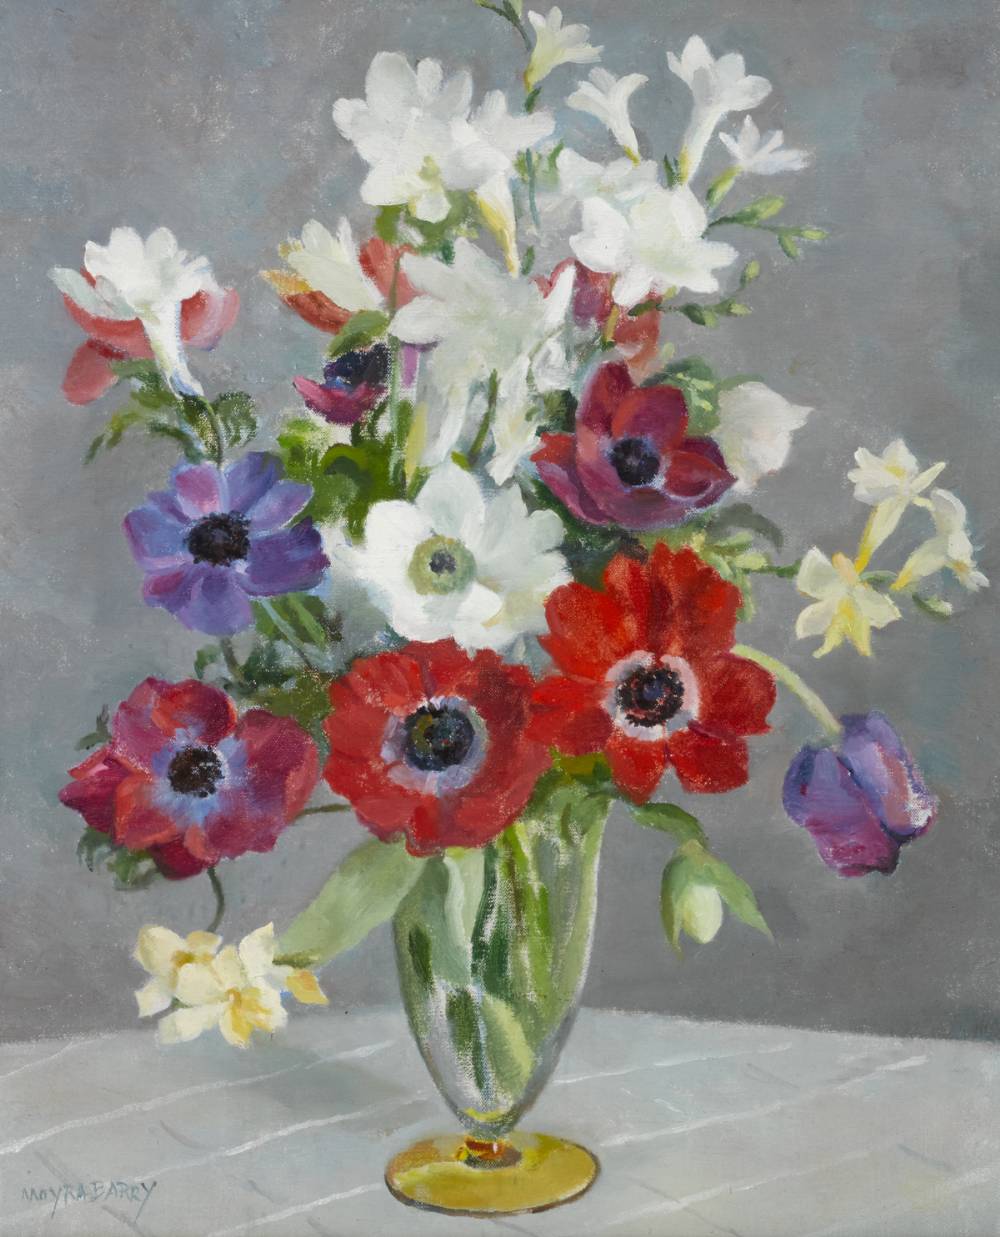 STILL LIFE WITH POPPIES by Moyra Barry sold for 360 at Whyte's Auctions